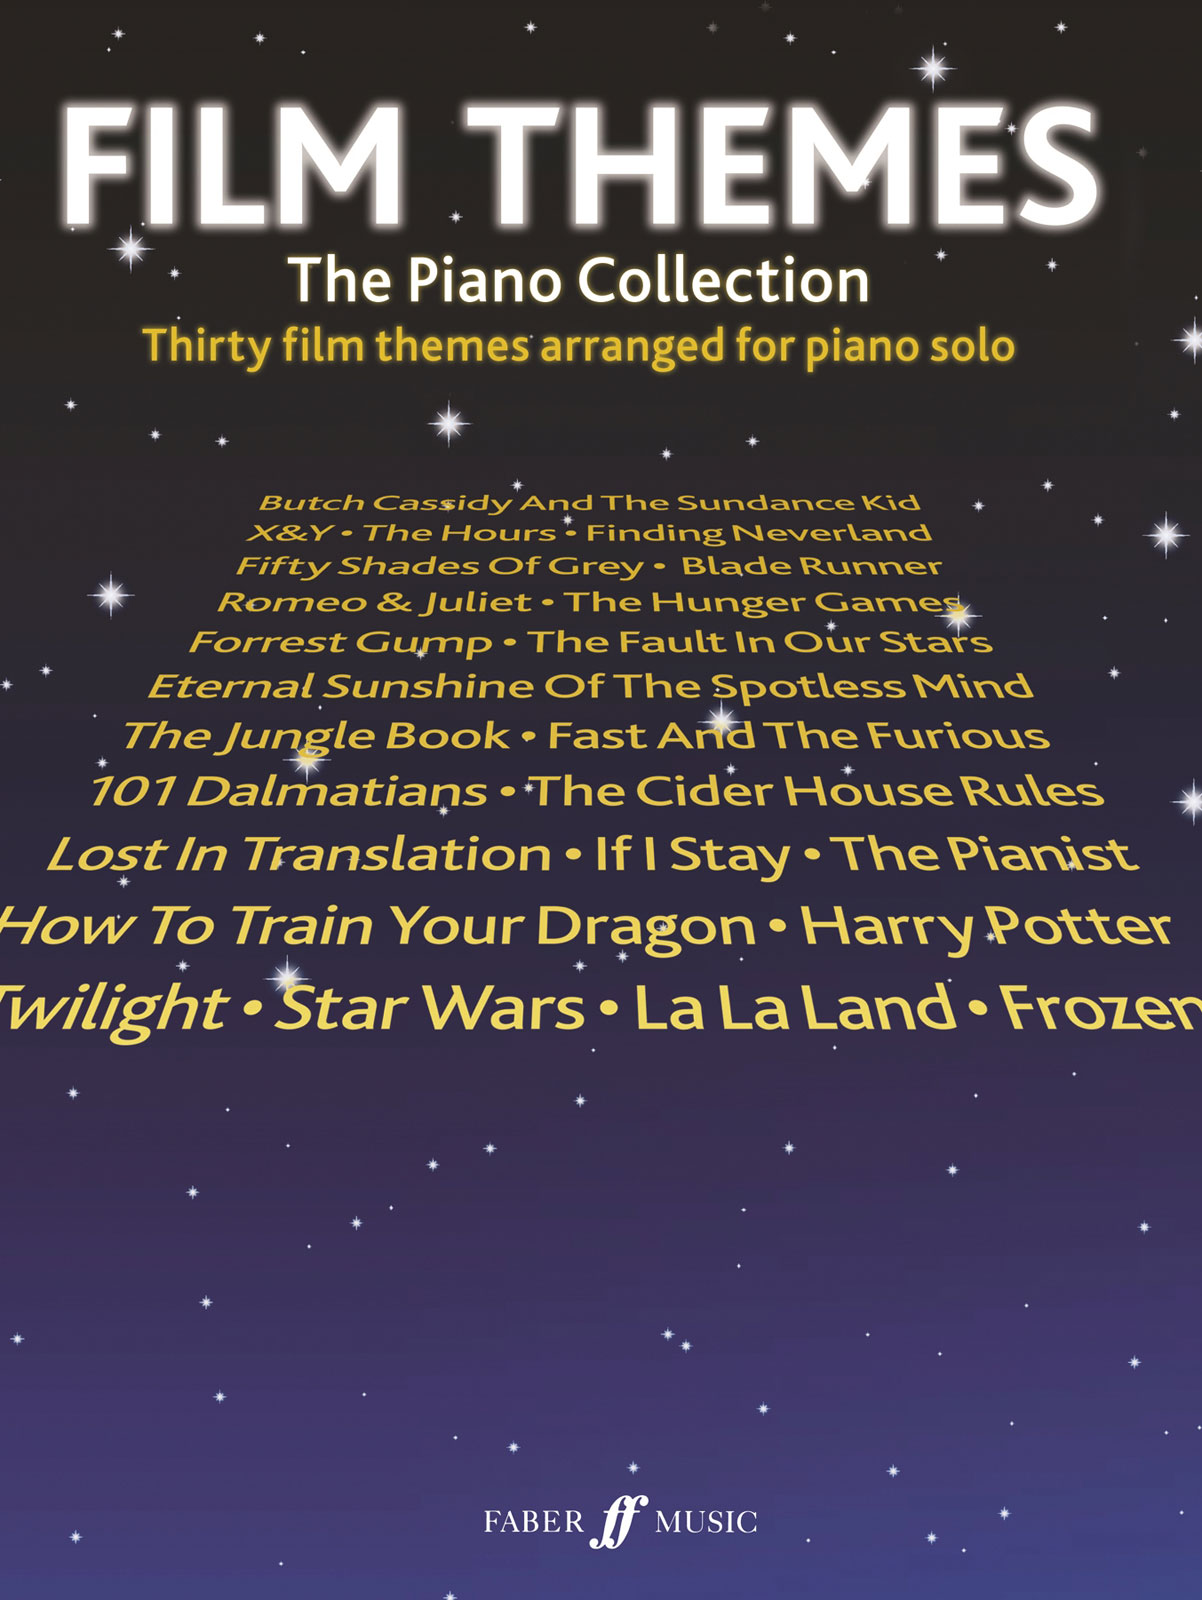 FABER MUSIC FILM THEMES - THE PIANO COLLECTION